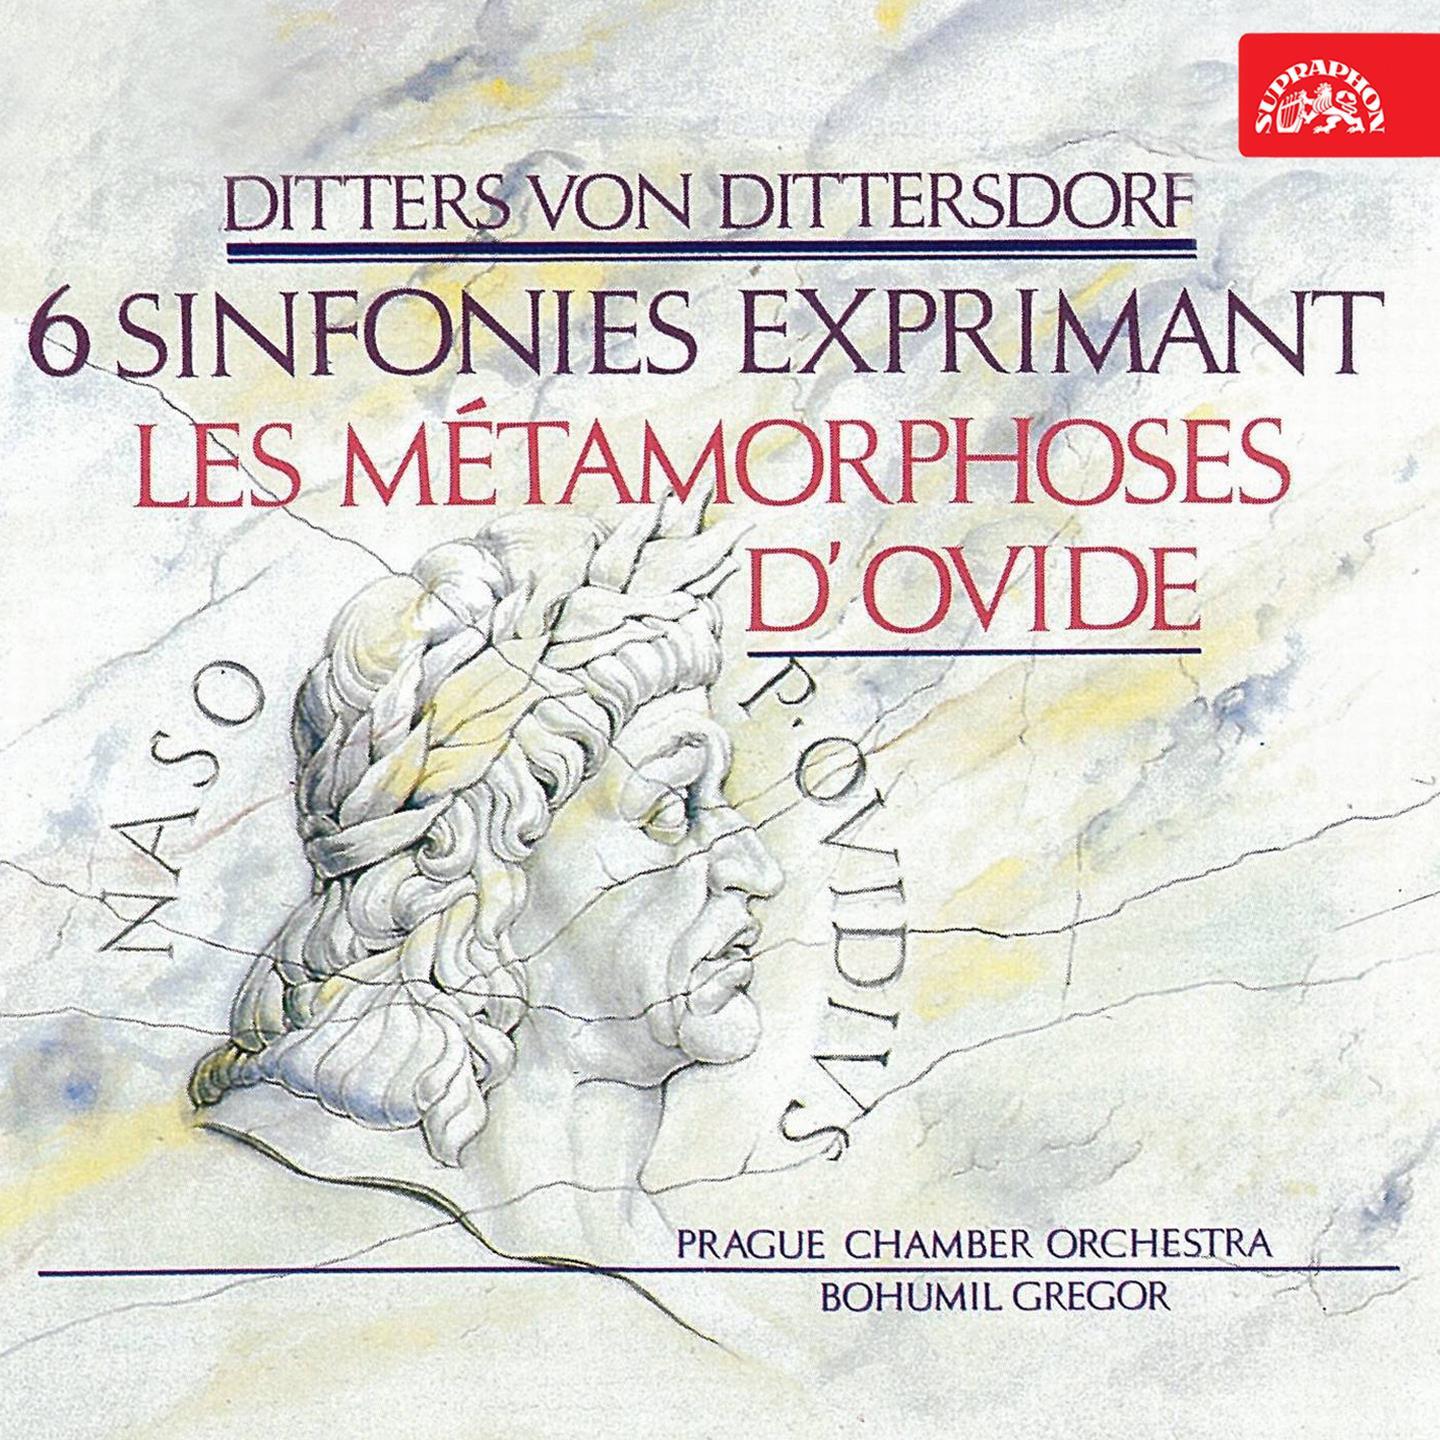 Symphonies After Ovid' s Metamorphoses, No. 2 in D Major, Kr. 74 " Der Sturz Pha tons": III. Tempo di minuetto